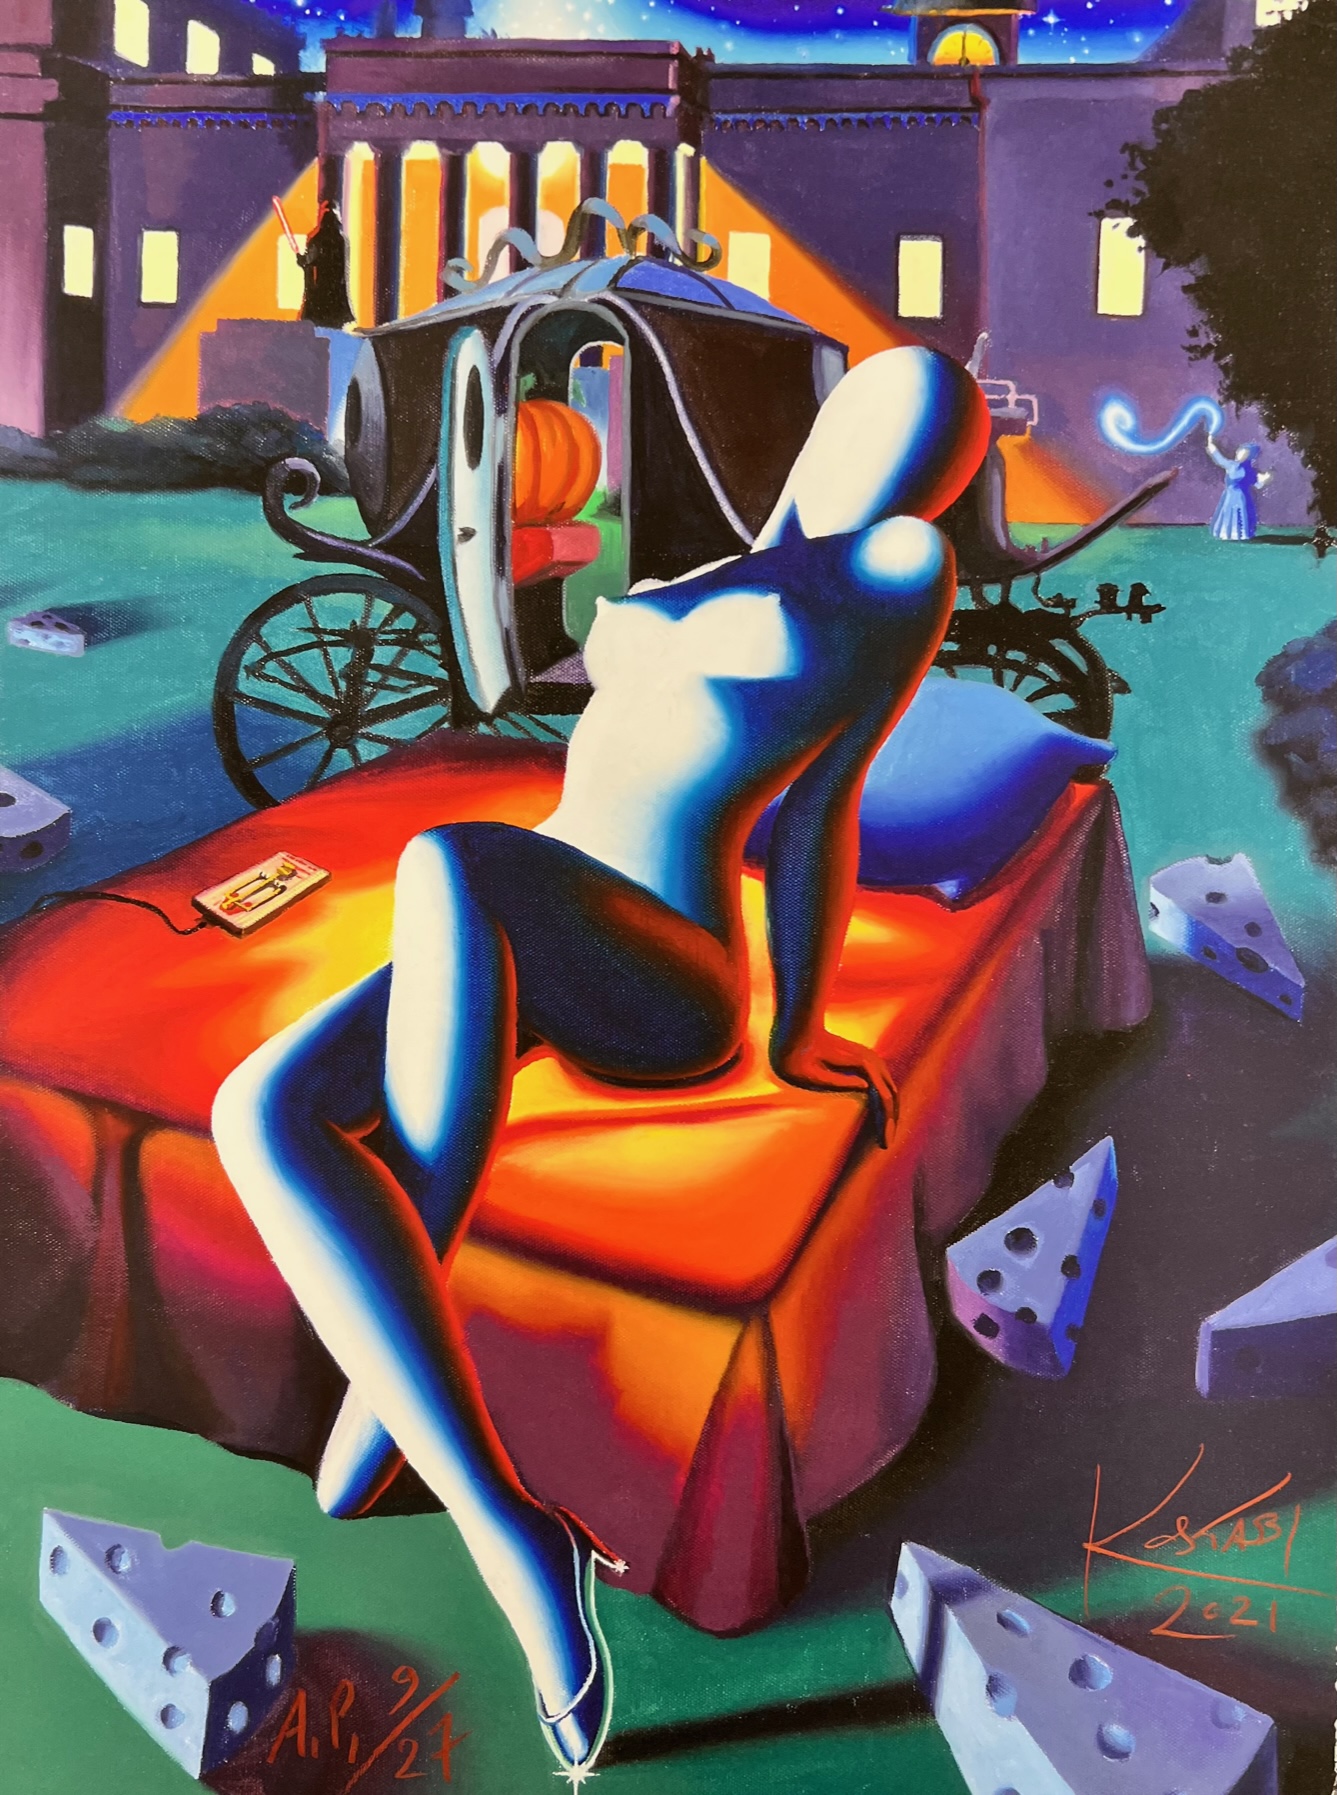 MARK KOSTABI - The Siren of Treia - Limited Edition Giclee on Paper - 15.5x21 inches